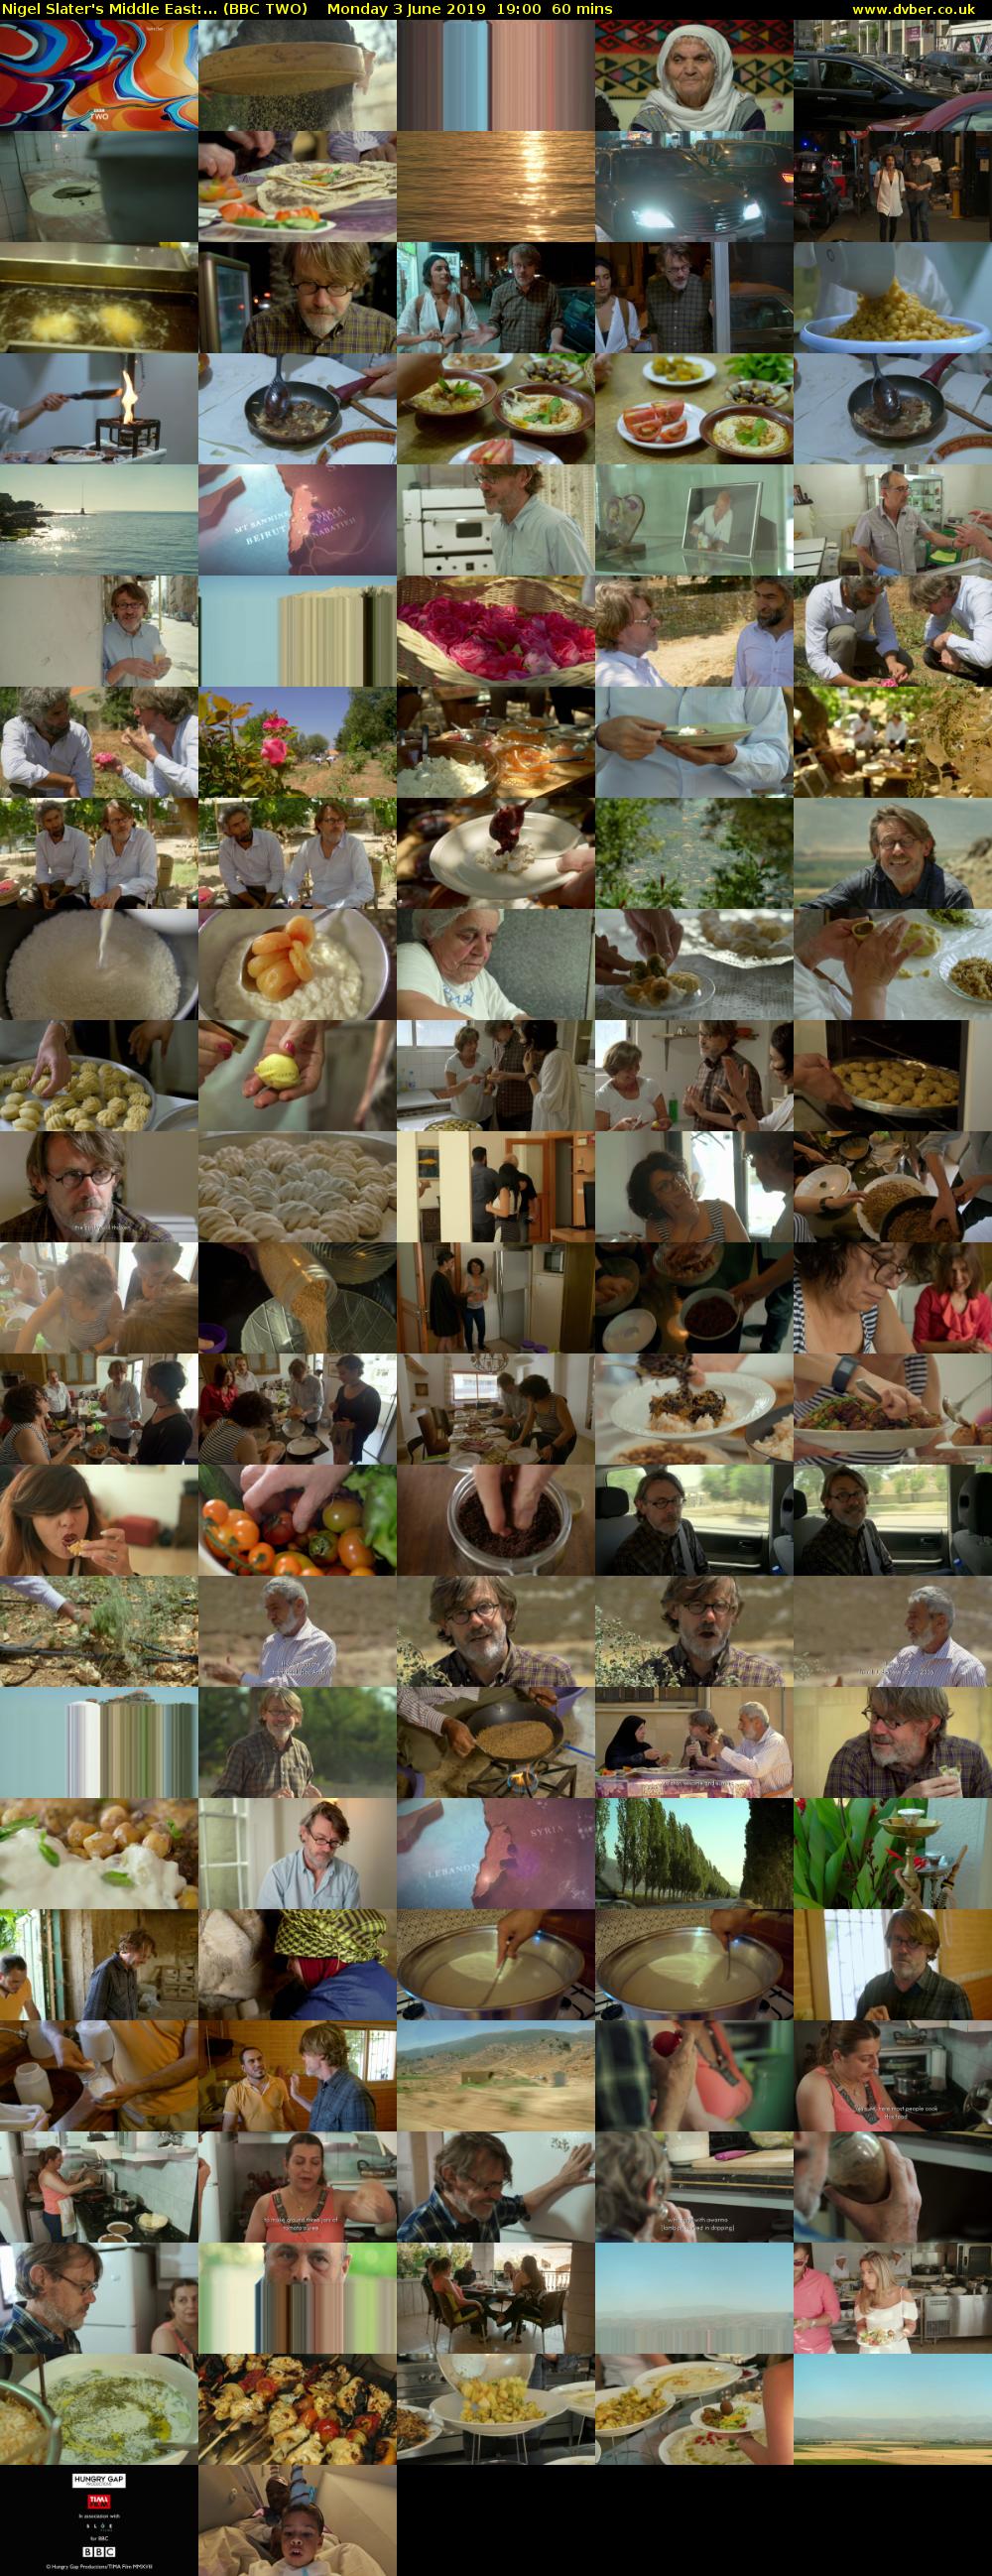 Nigel Slater's Middle East:... (BBC TWO) Monday 3 June 2019 19:00 - 20:00